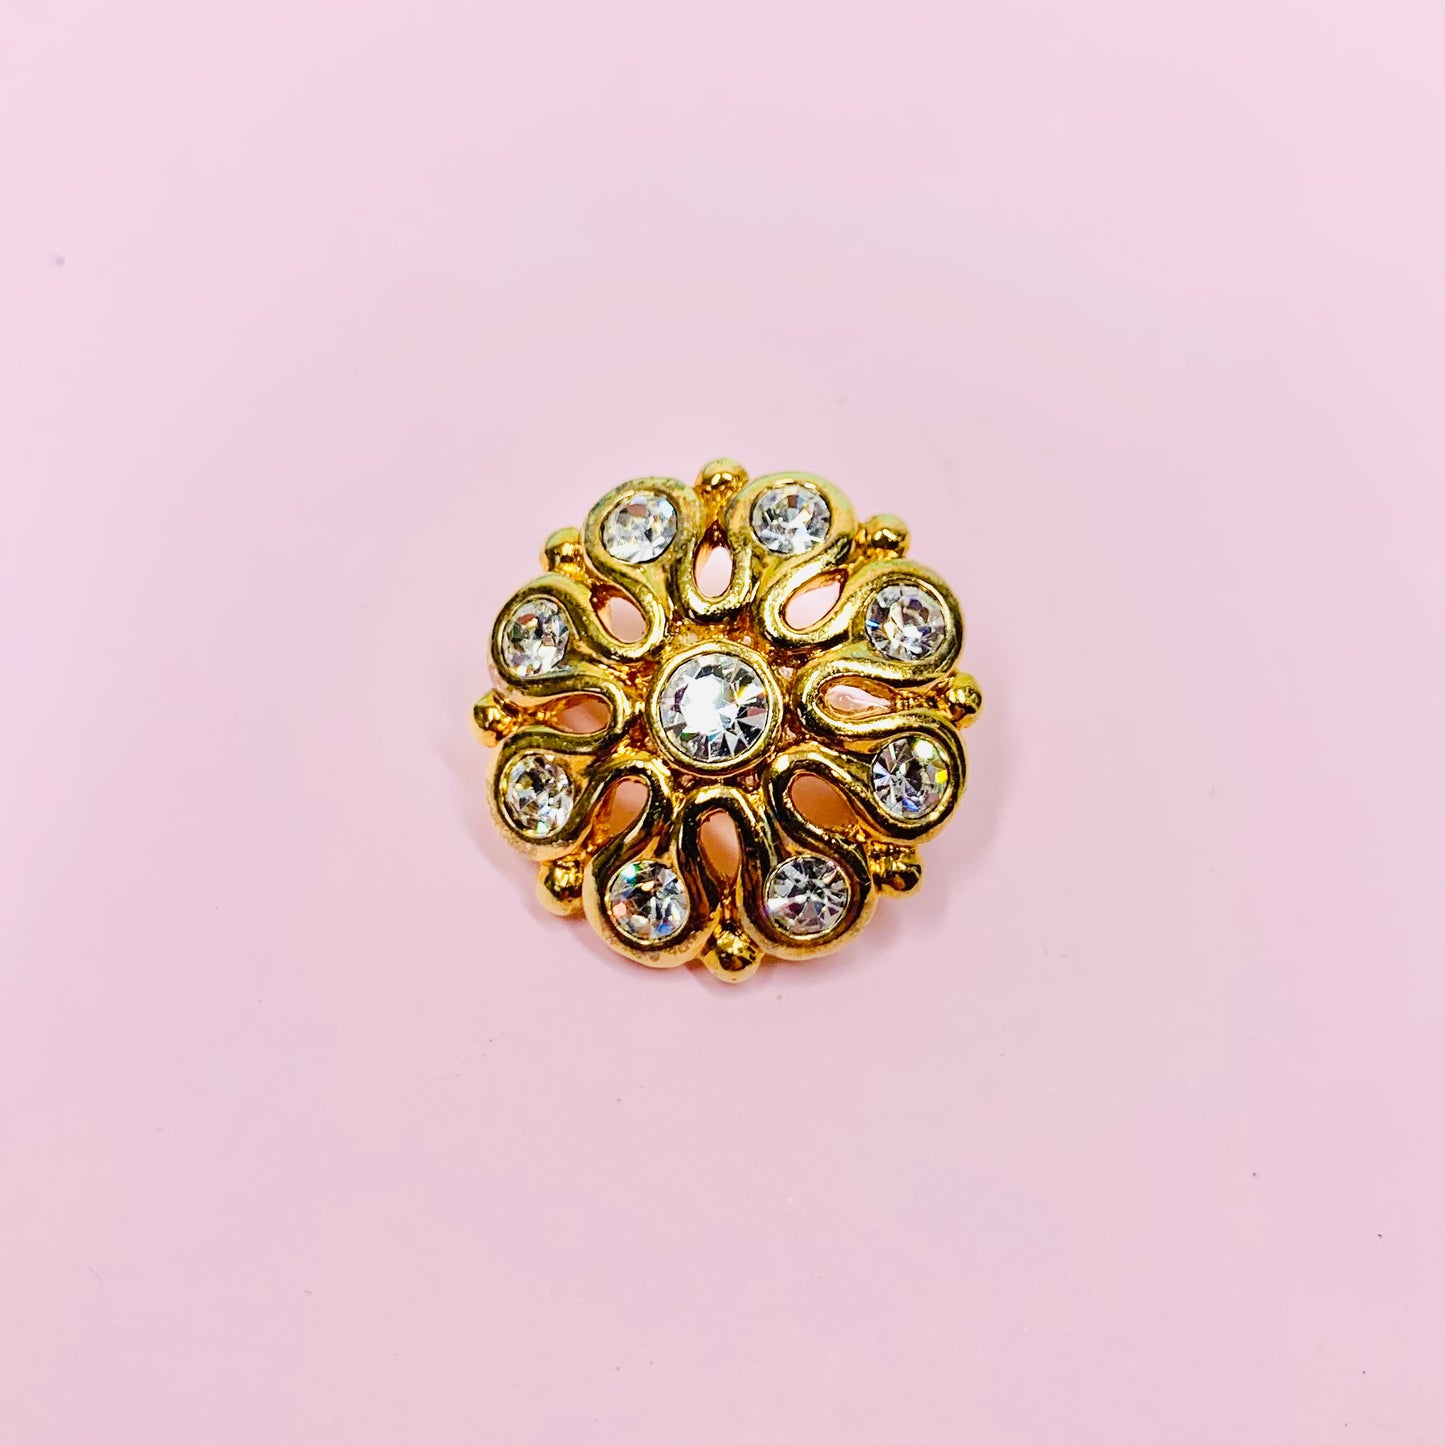 1970s Oroton gold plated brooch with Swarovski crystals